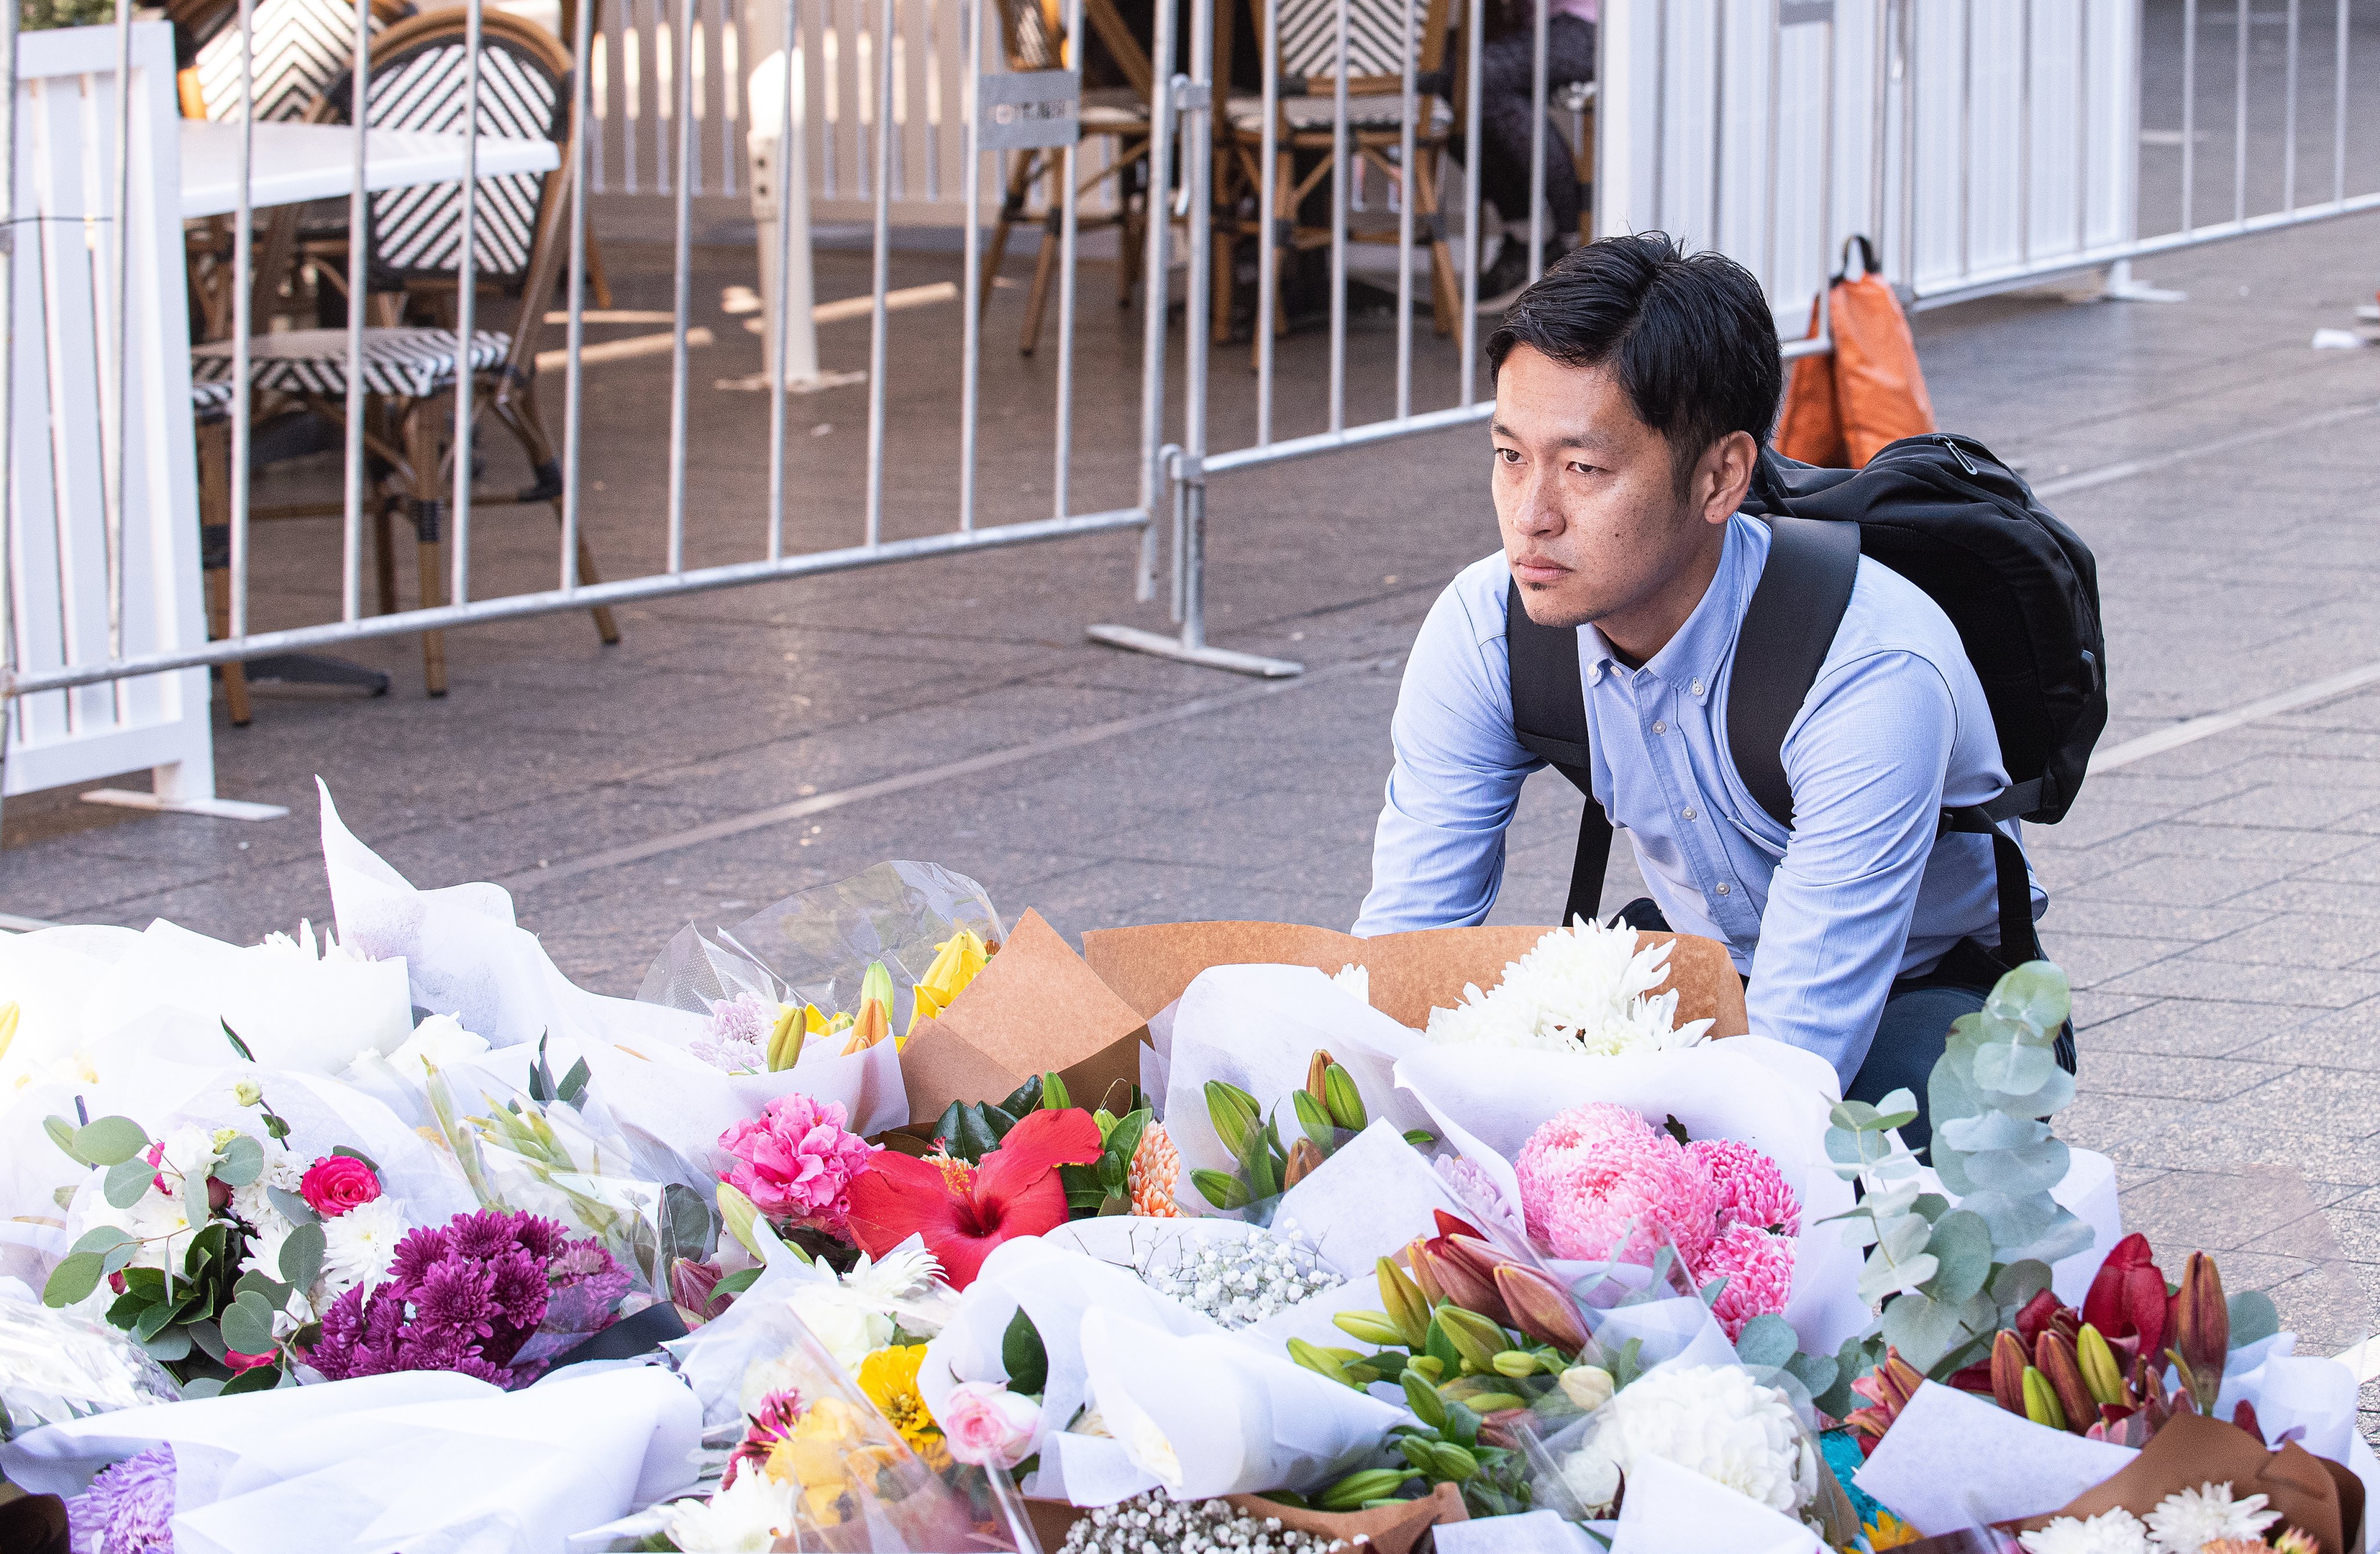 A man reacts near a makeshift memorial outside the Westfield Bondi Junction shopping centre in tribute to the victims of a stabbing spree there on Saturday. Photo: EPA-EFE